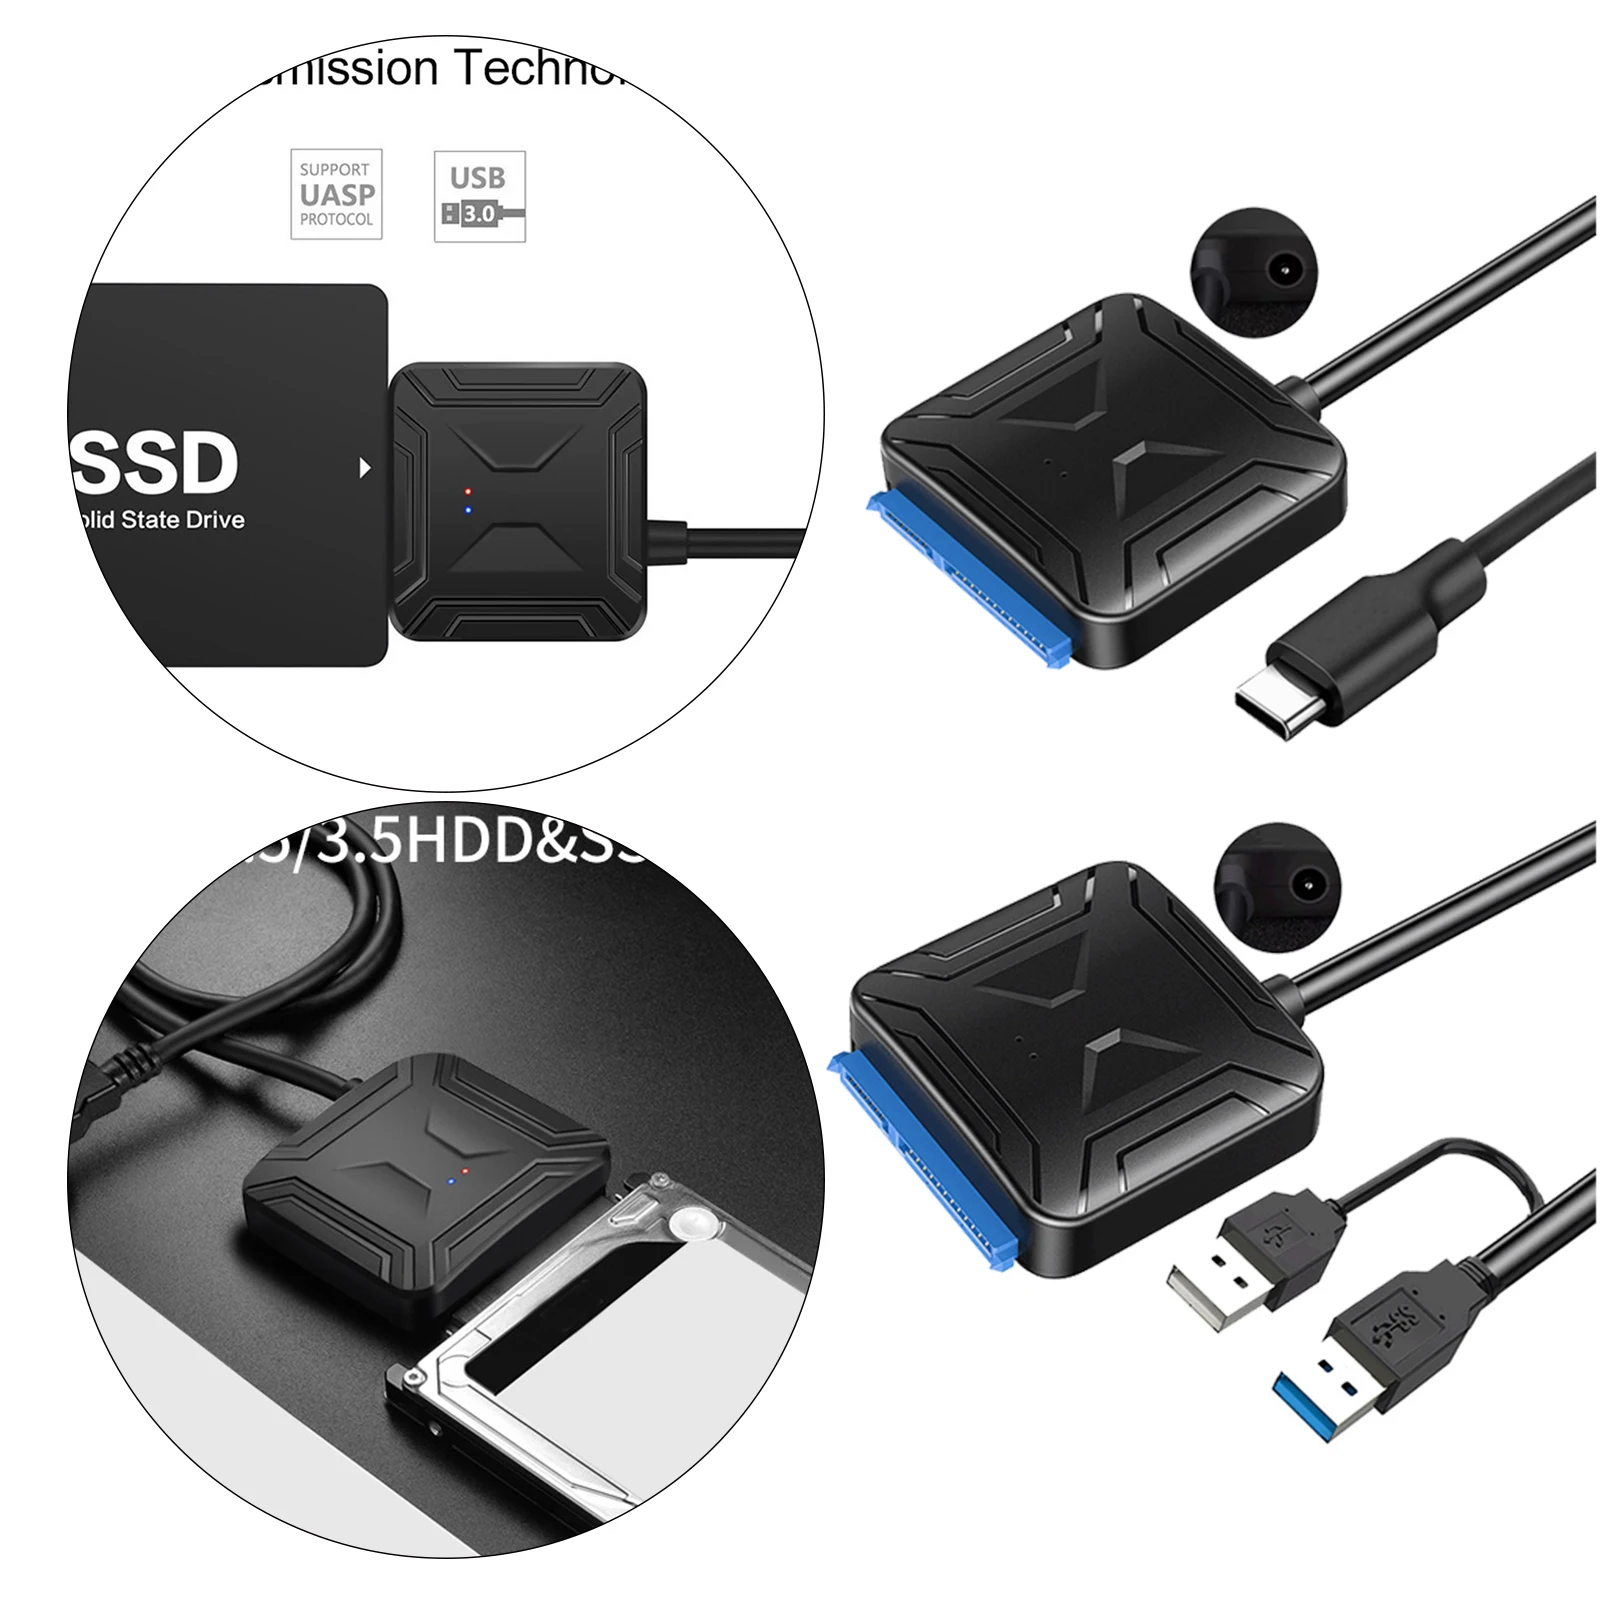 SATA to USB 3.0 Adapter Cable for 3.5 2.5 Inch SSD HDD with 12V Power Adapter External Converter for SSD/HDD Data Transfer